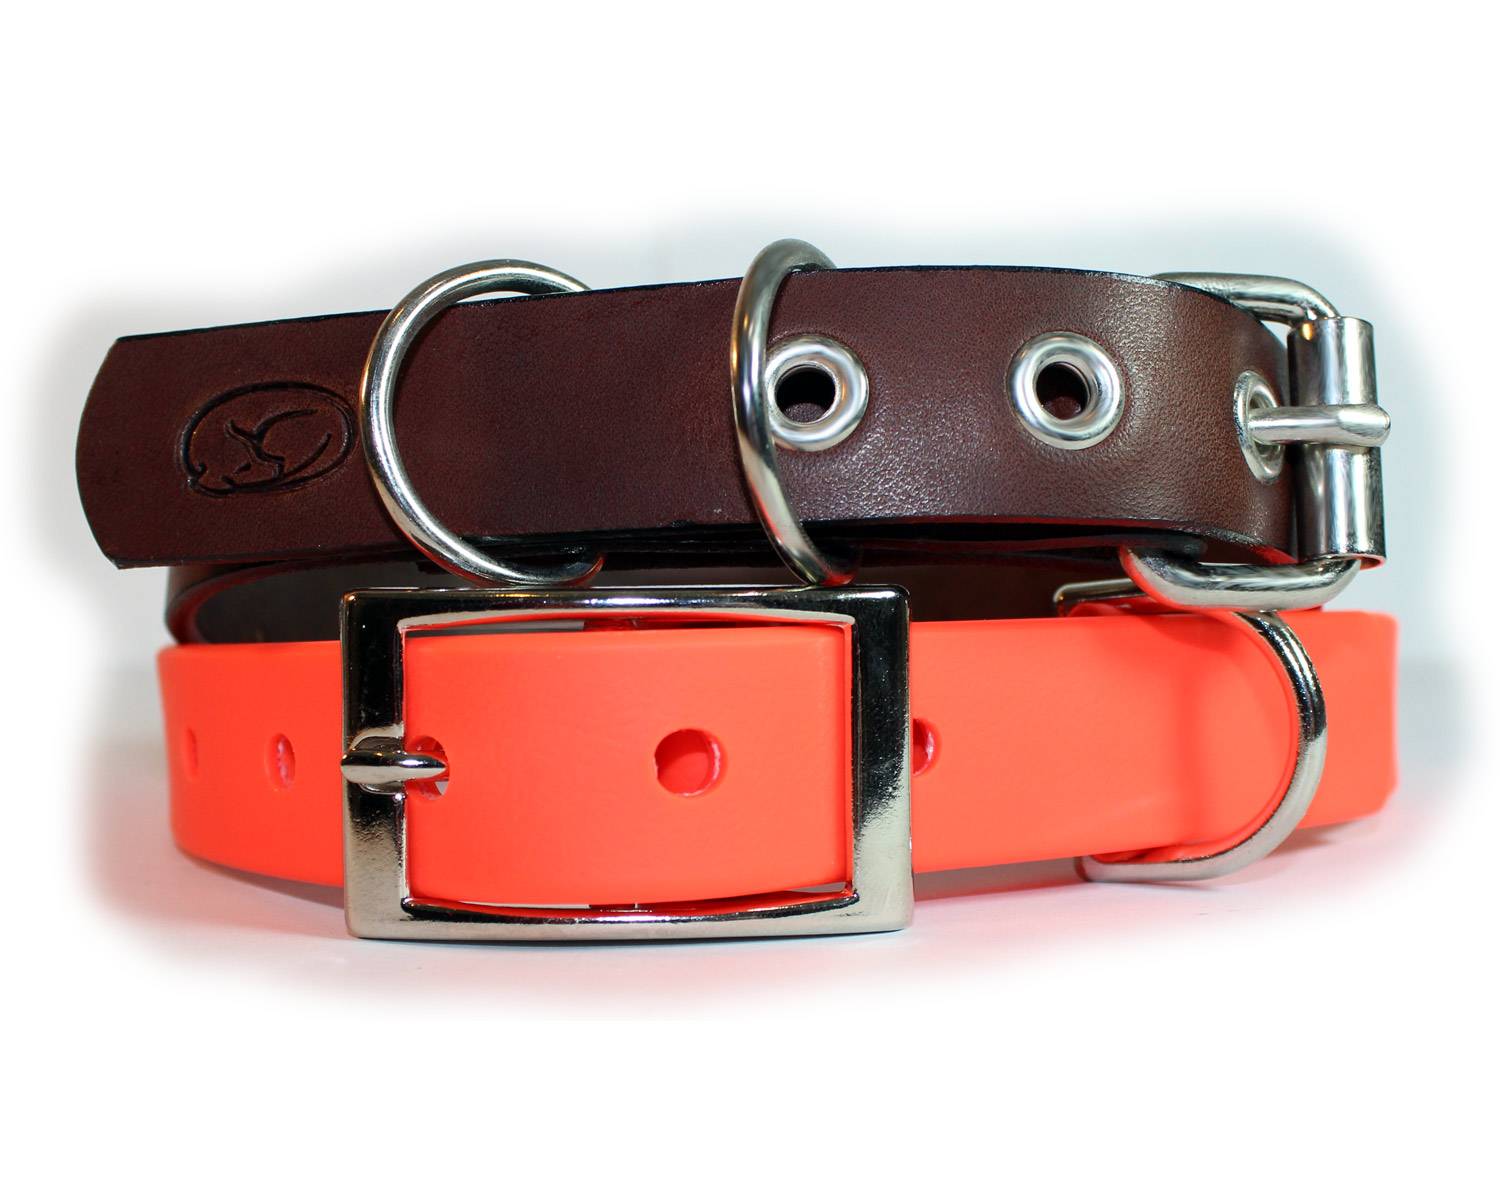 Photo of a leather collar and a waterproof collar